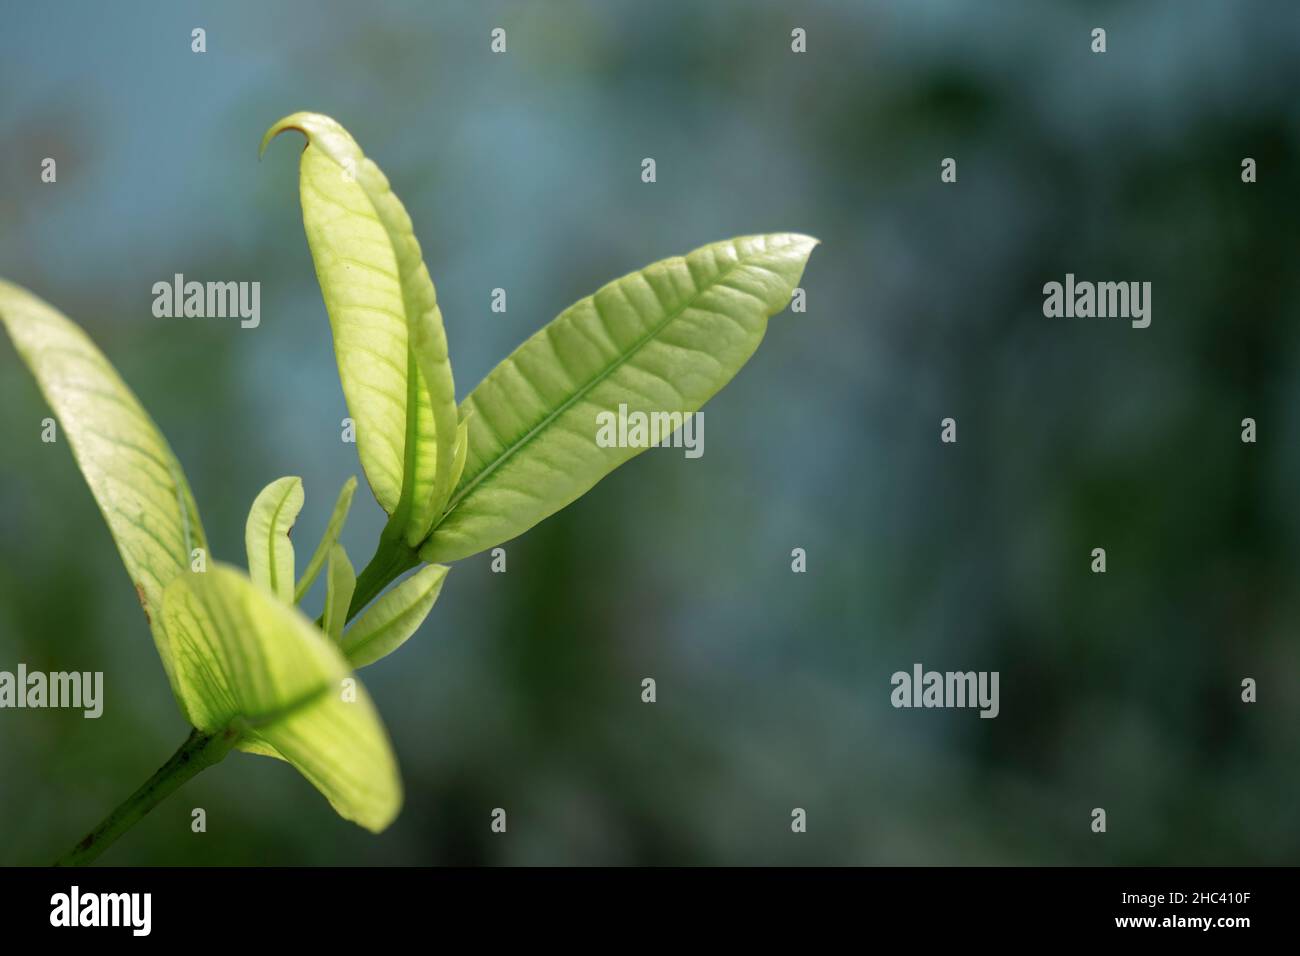 Side view of the growing green leaves of the plant on the blurry background Stock Photo